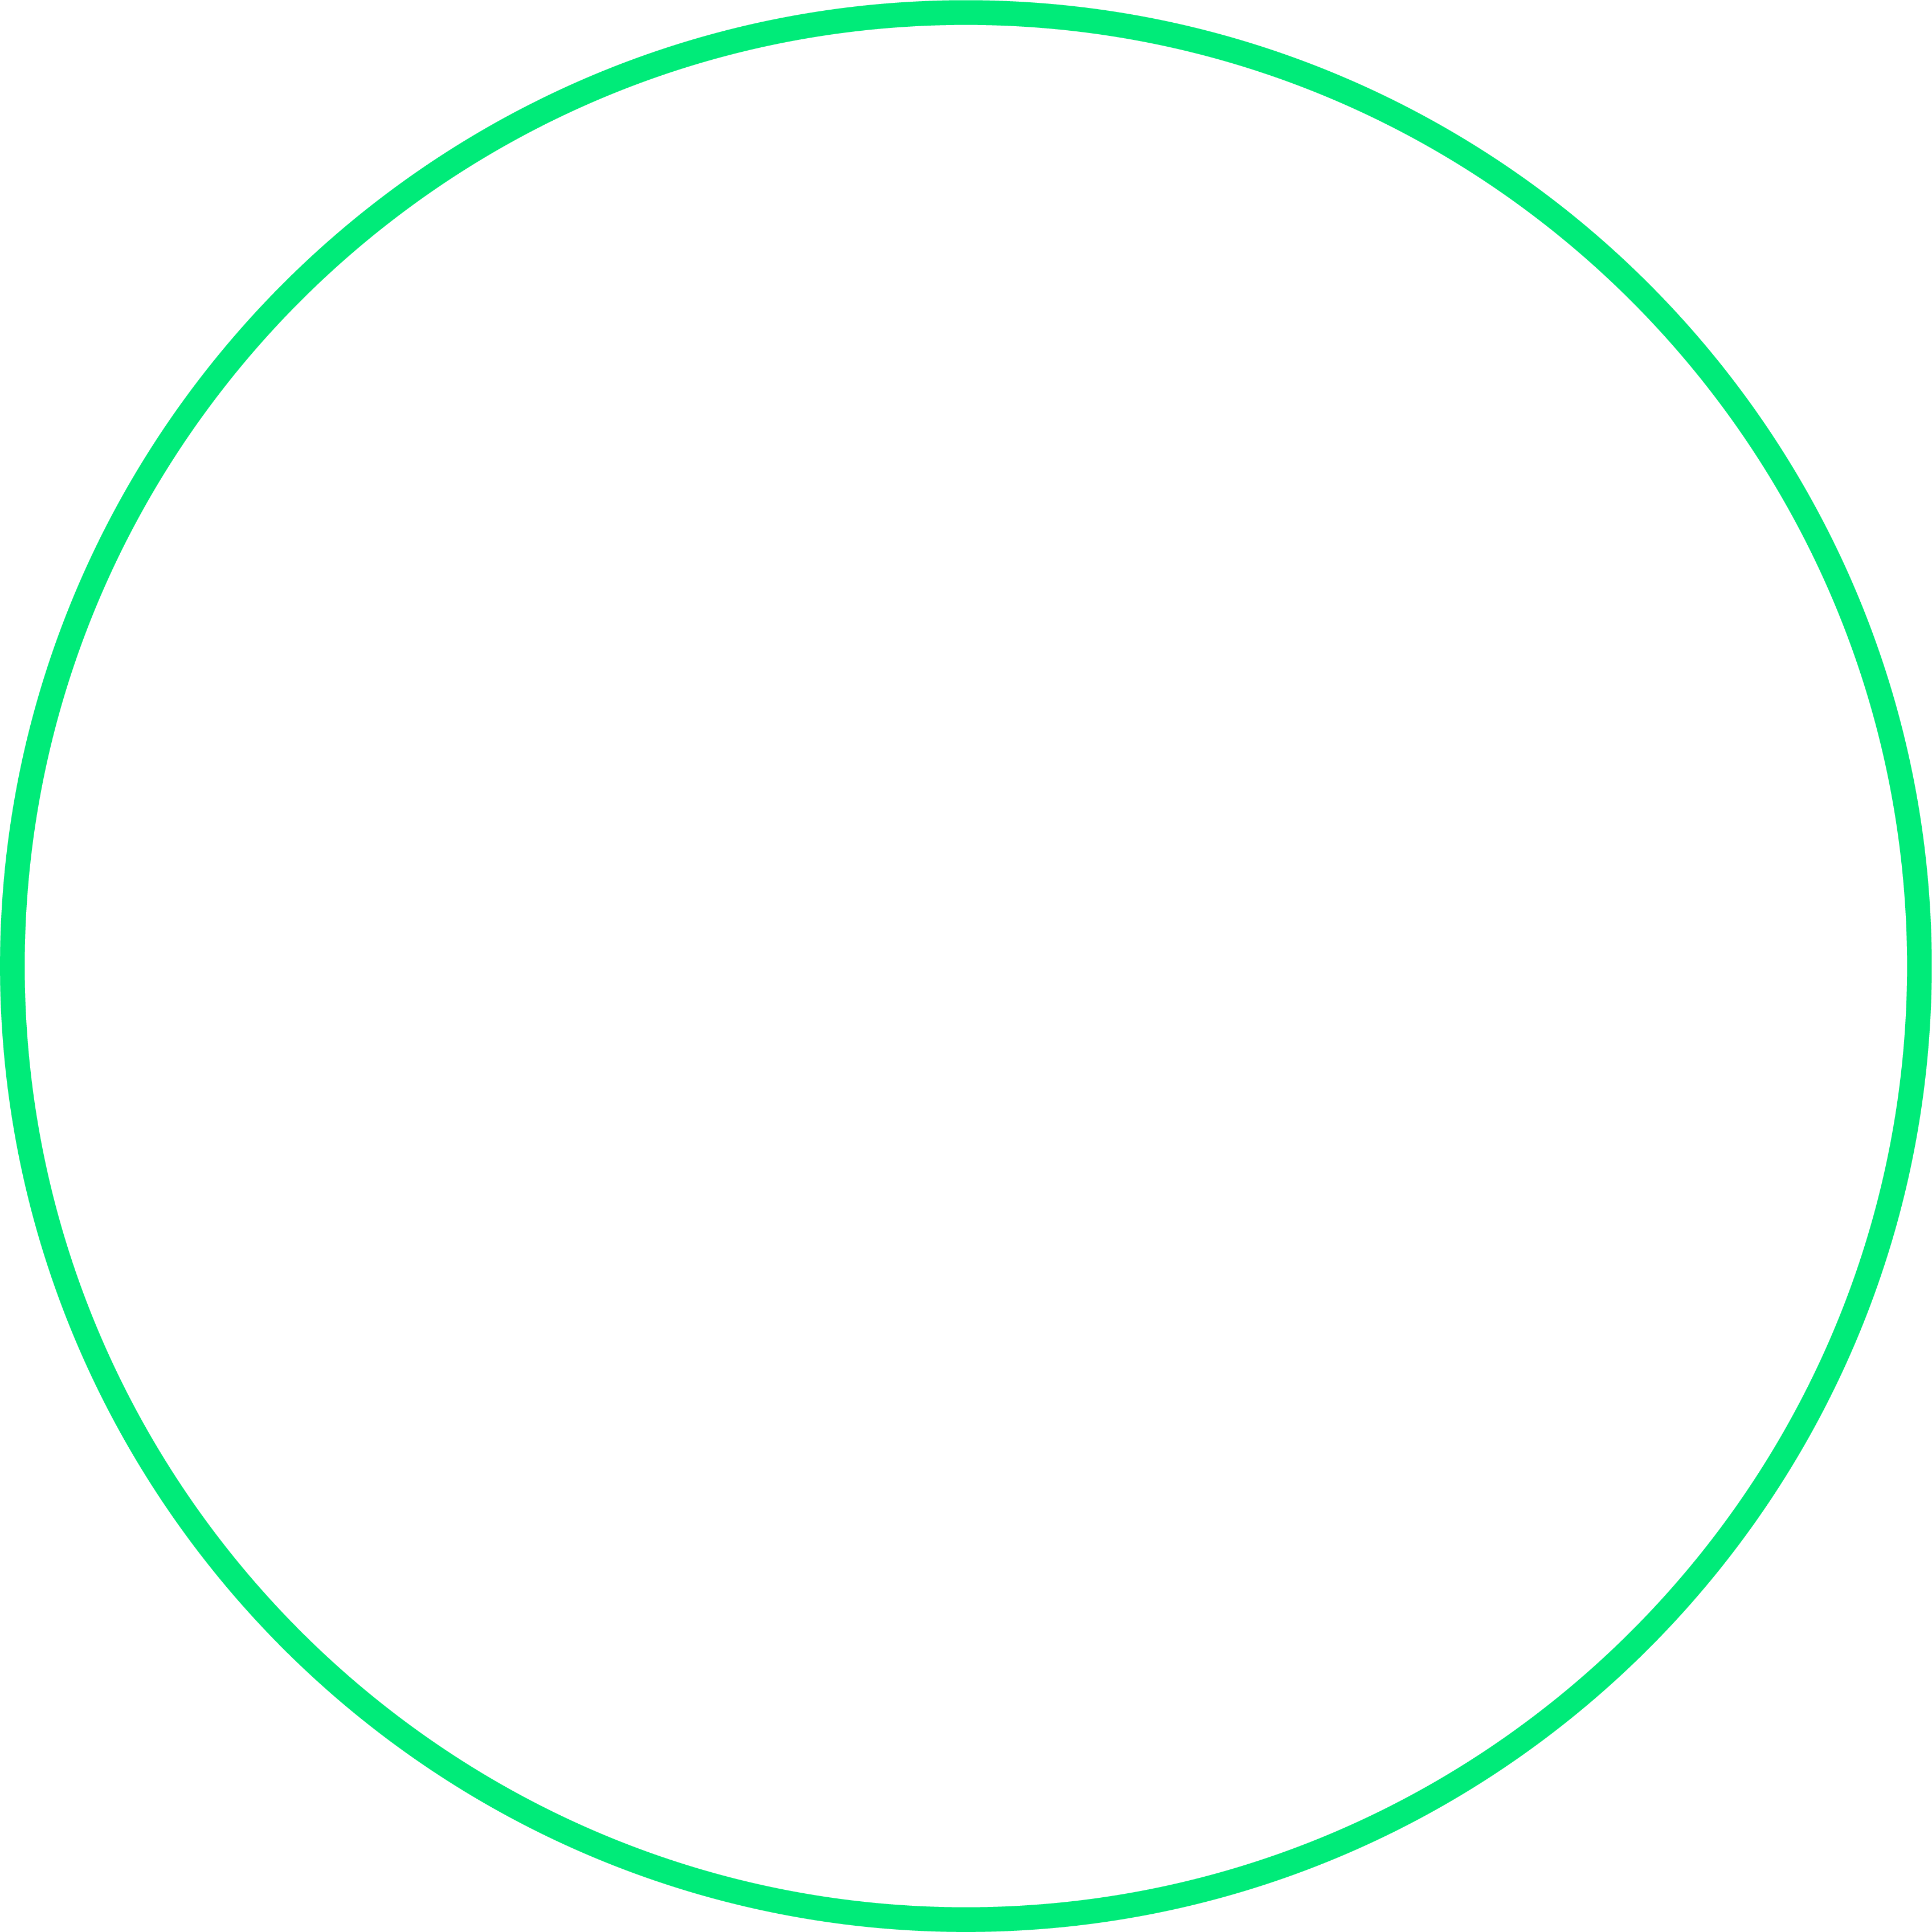 An outline of a bright green circle.